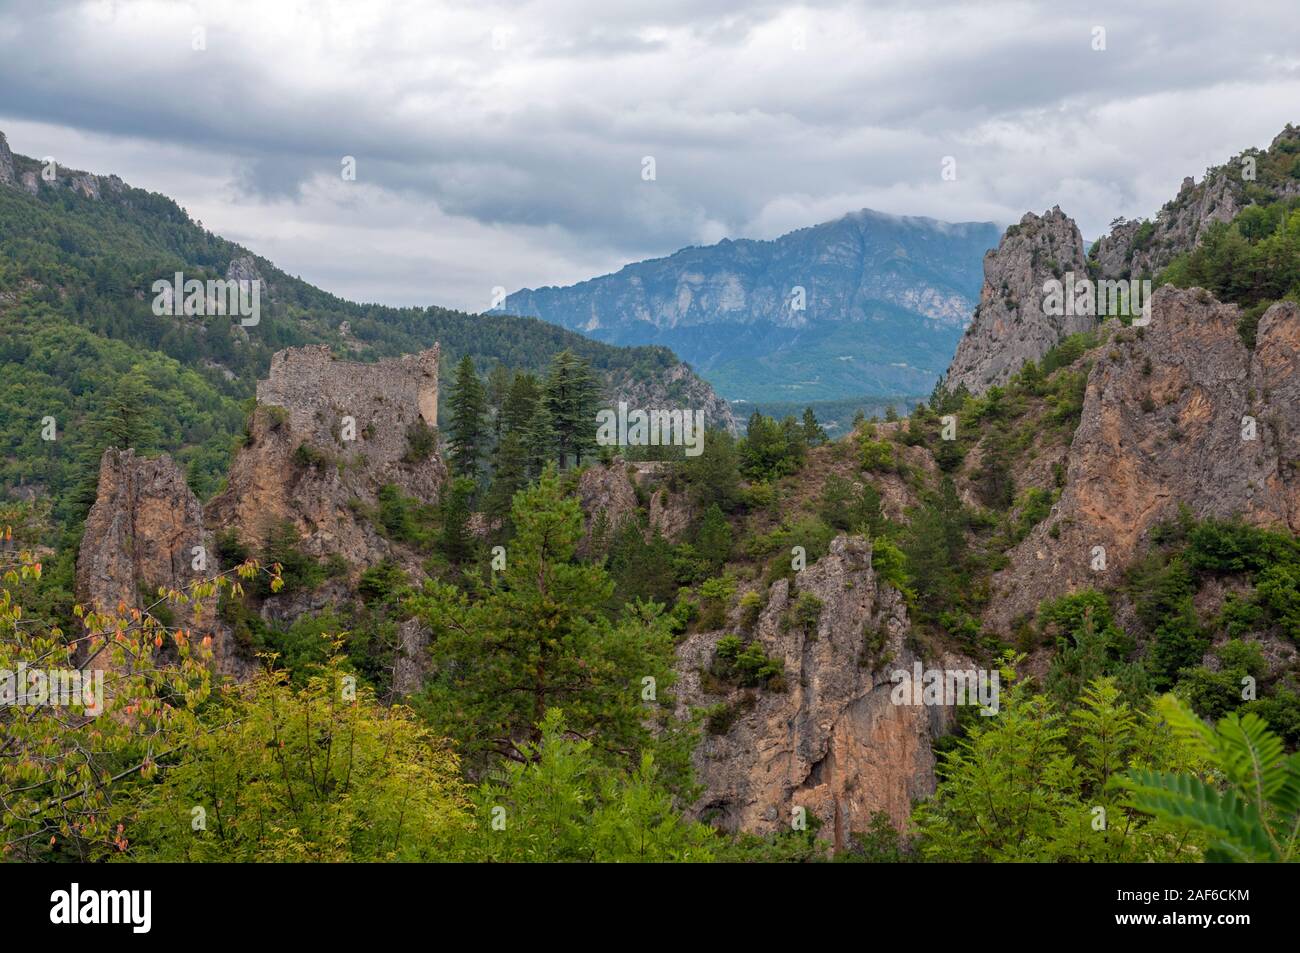 View of the rocks overlooking the town of Guillaumes in the ‘Gorges Rouges’ and the ruins of Queen Joan's castle (Chateau de Reine Jeanne), France Stock Photo